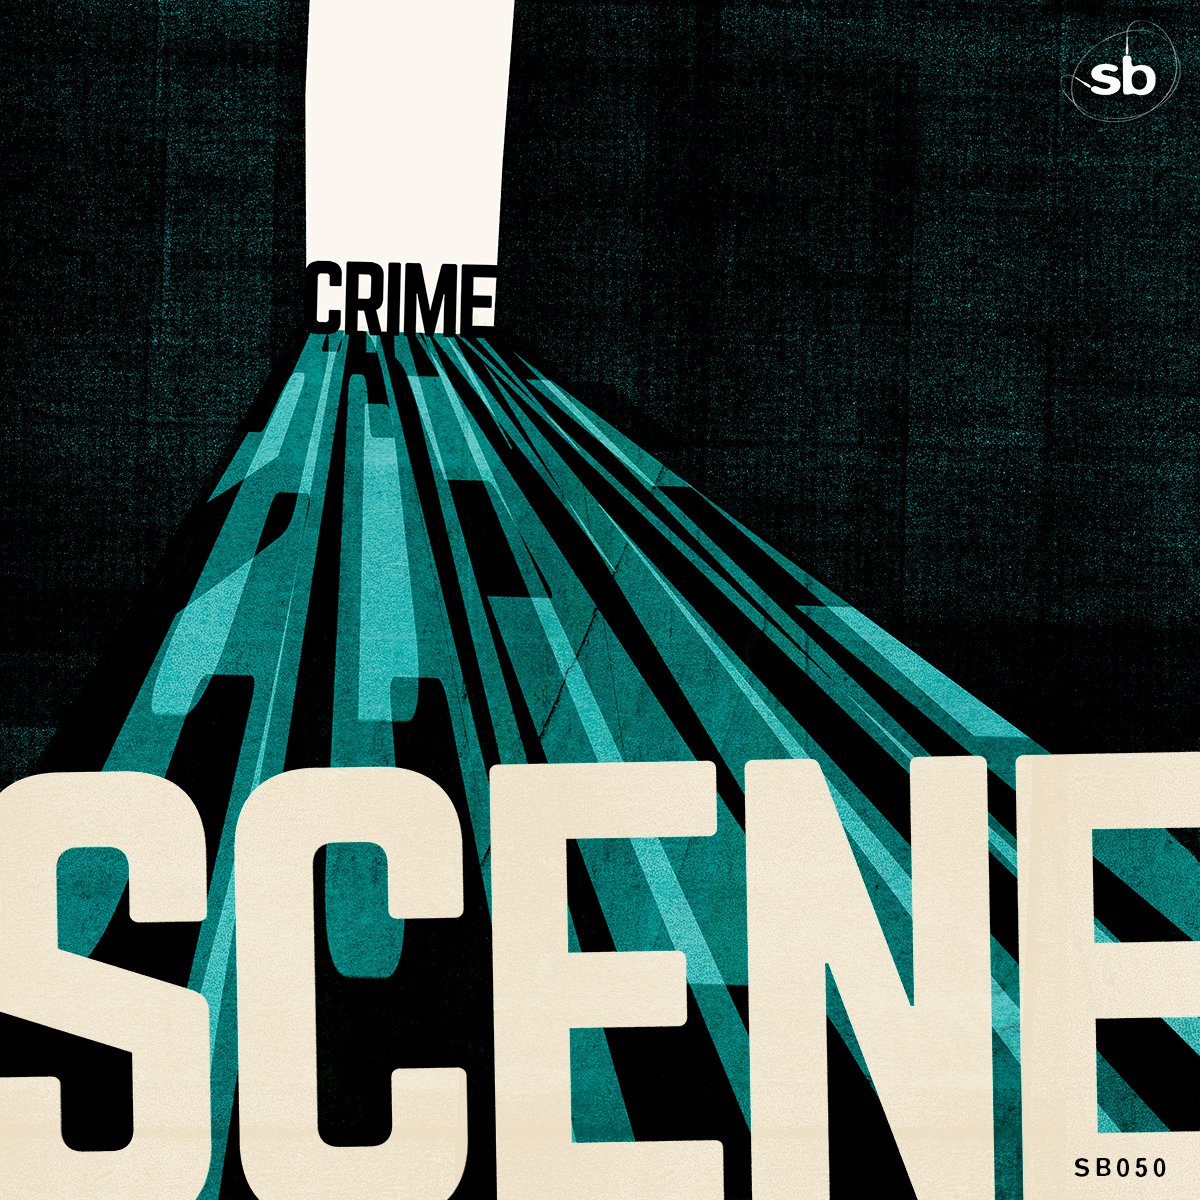 'Crime Scene' blends dark synths, haunting piano, solo violin and ticking percussion. Evoking suspense and tension, it creates a spine-tingling soundtrack for the pursuit of truth in the shadowy underworld.

Cover art @clairegoble

#productionmusic #sneakybiscuitmusic #crimetv